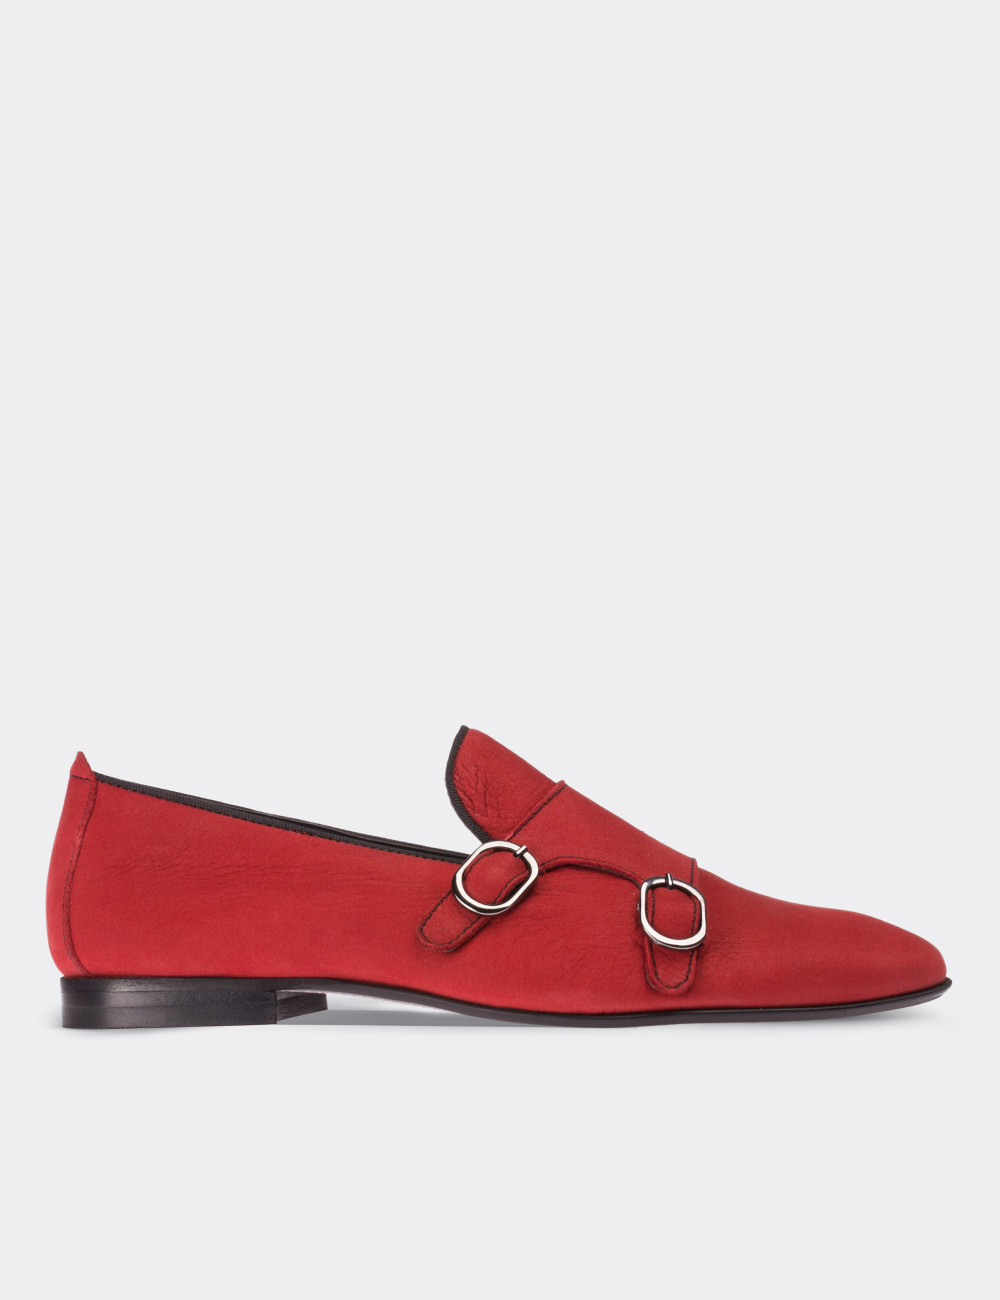 Red Nubuck Leather Loafers - 01611ZKRMM02